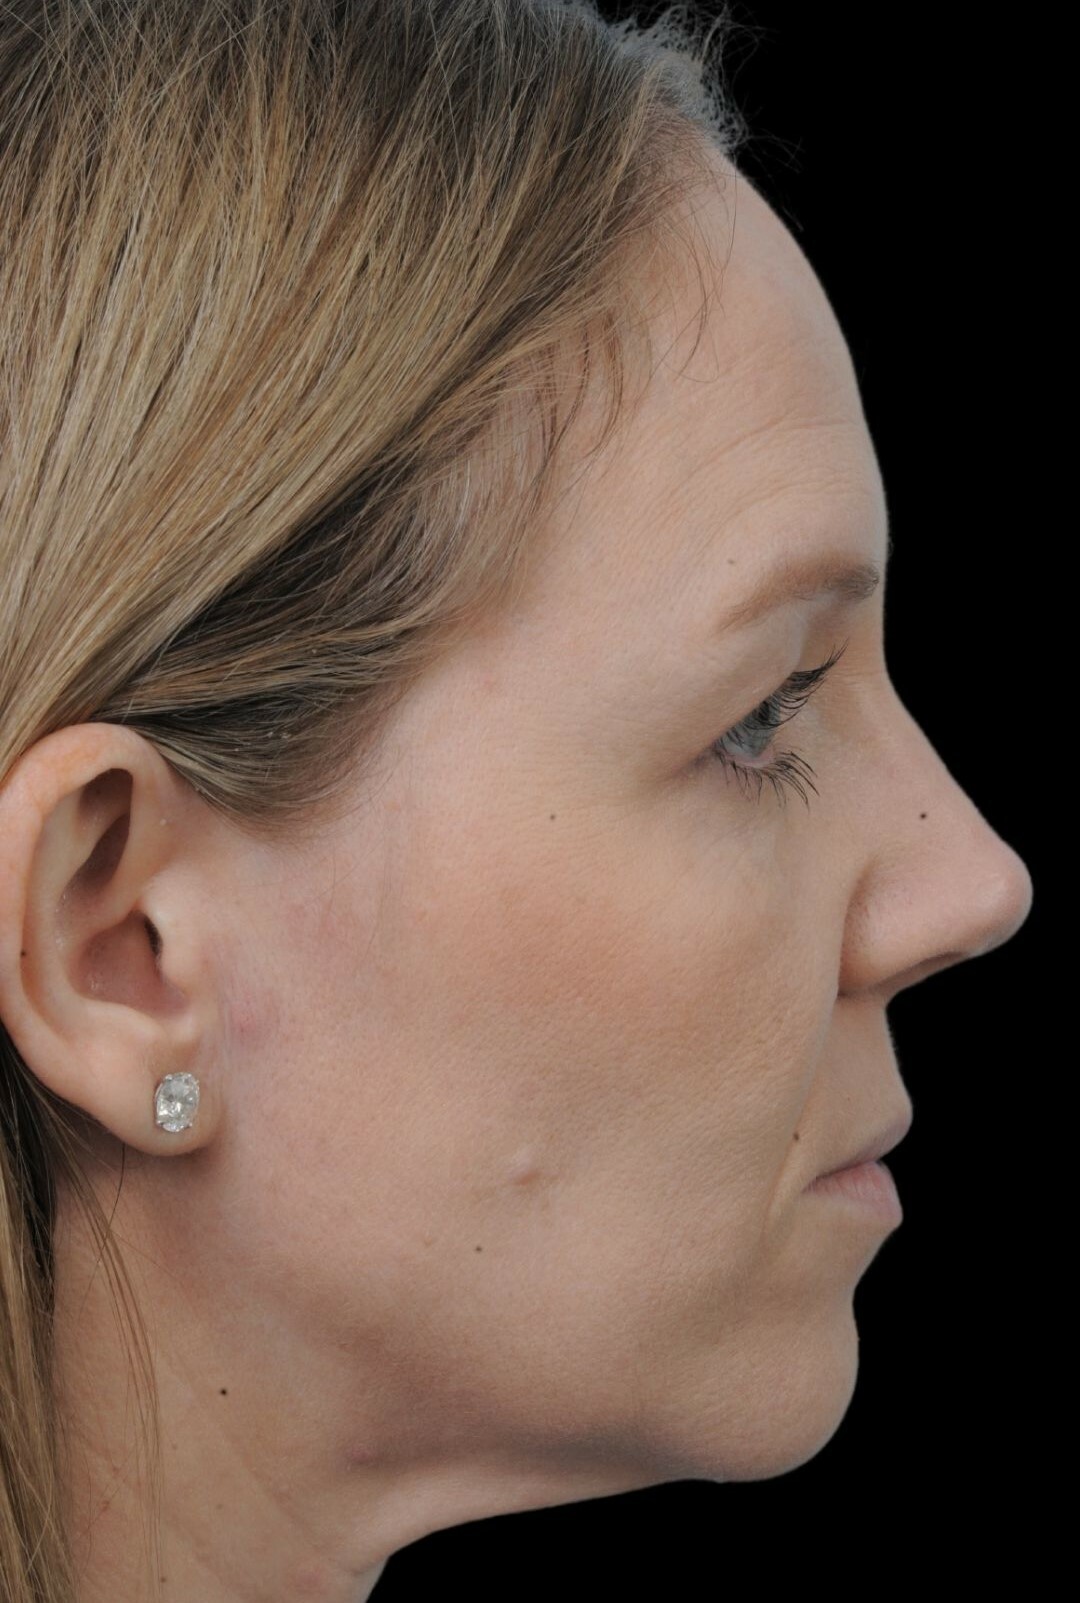 Photo of the patient’s face after the Rhinoplasty surgery. Patient 9 - Set 1